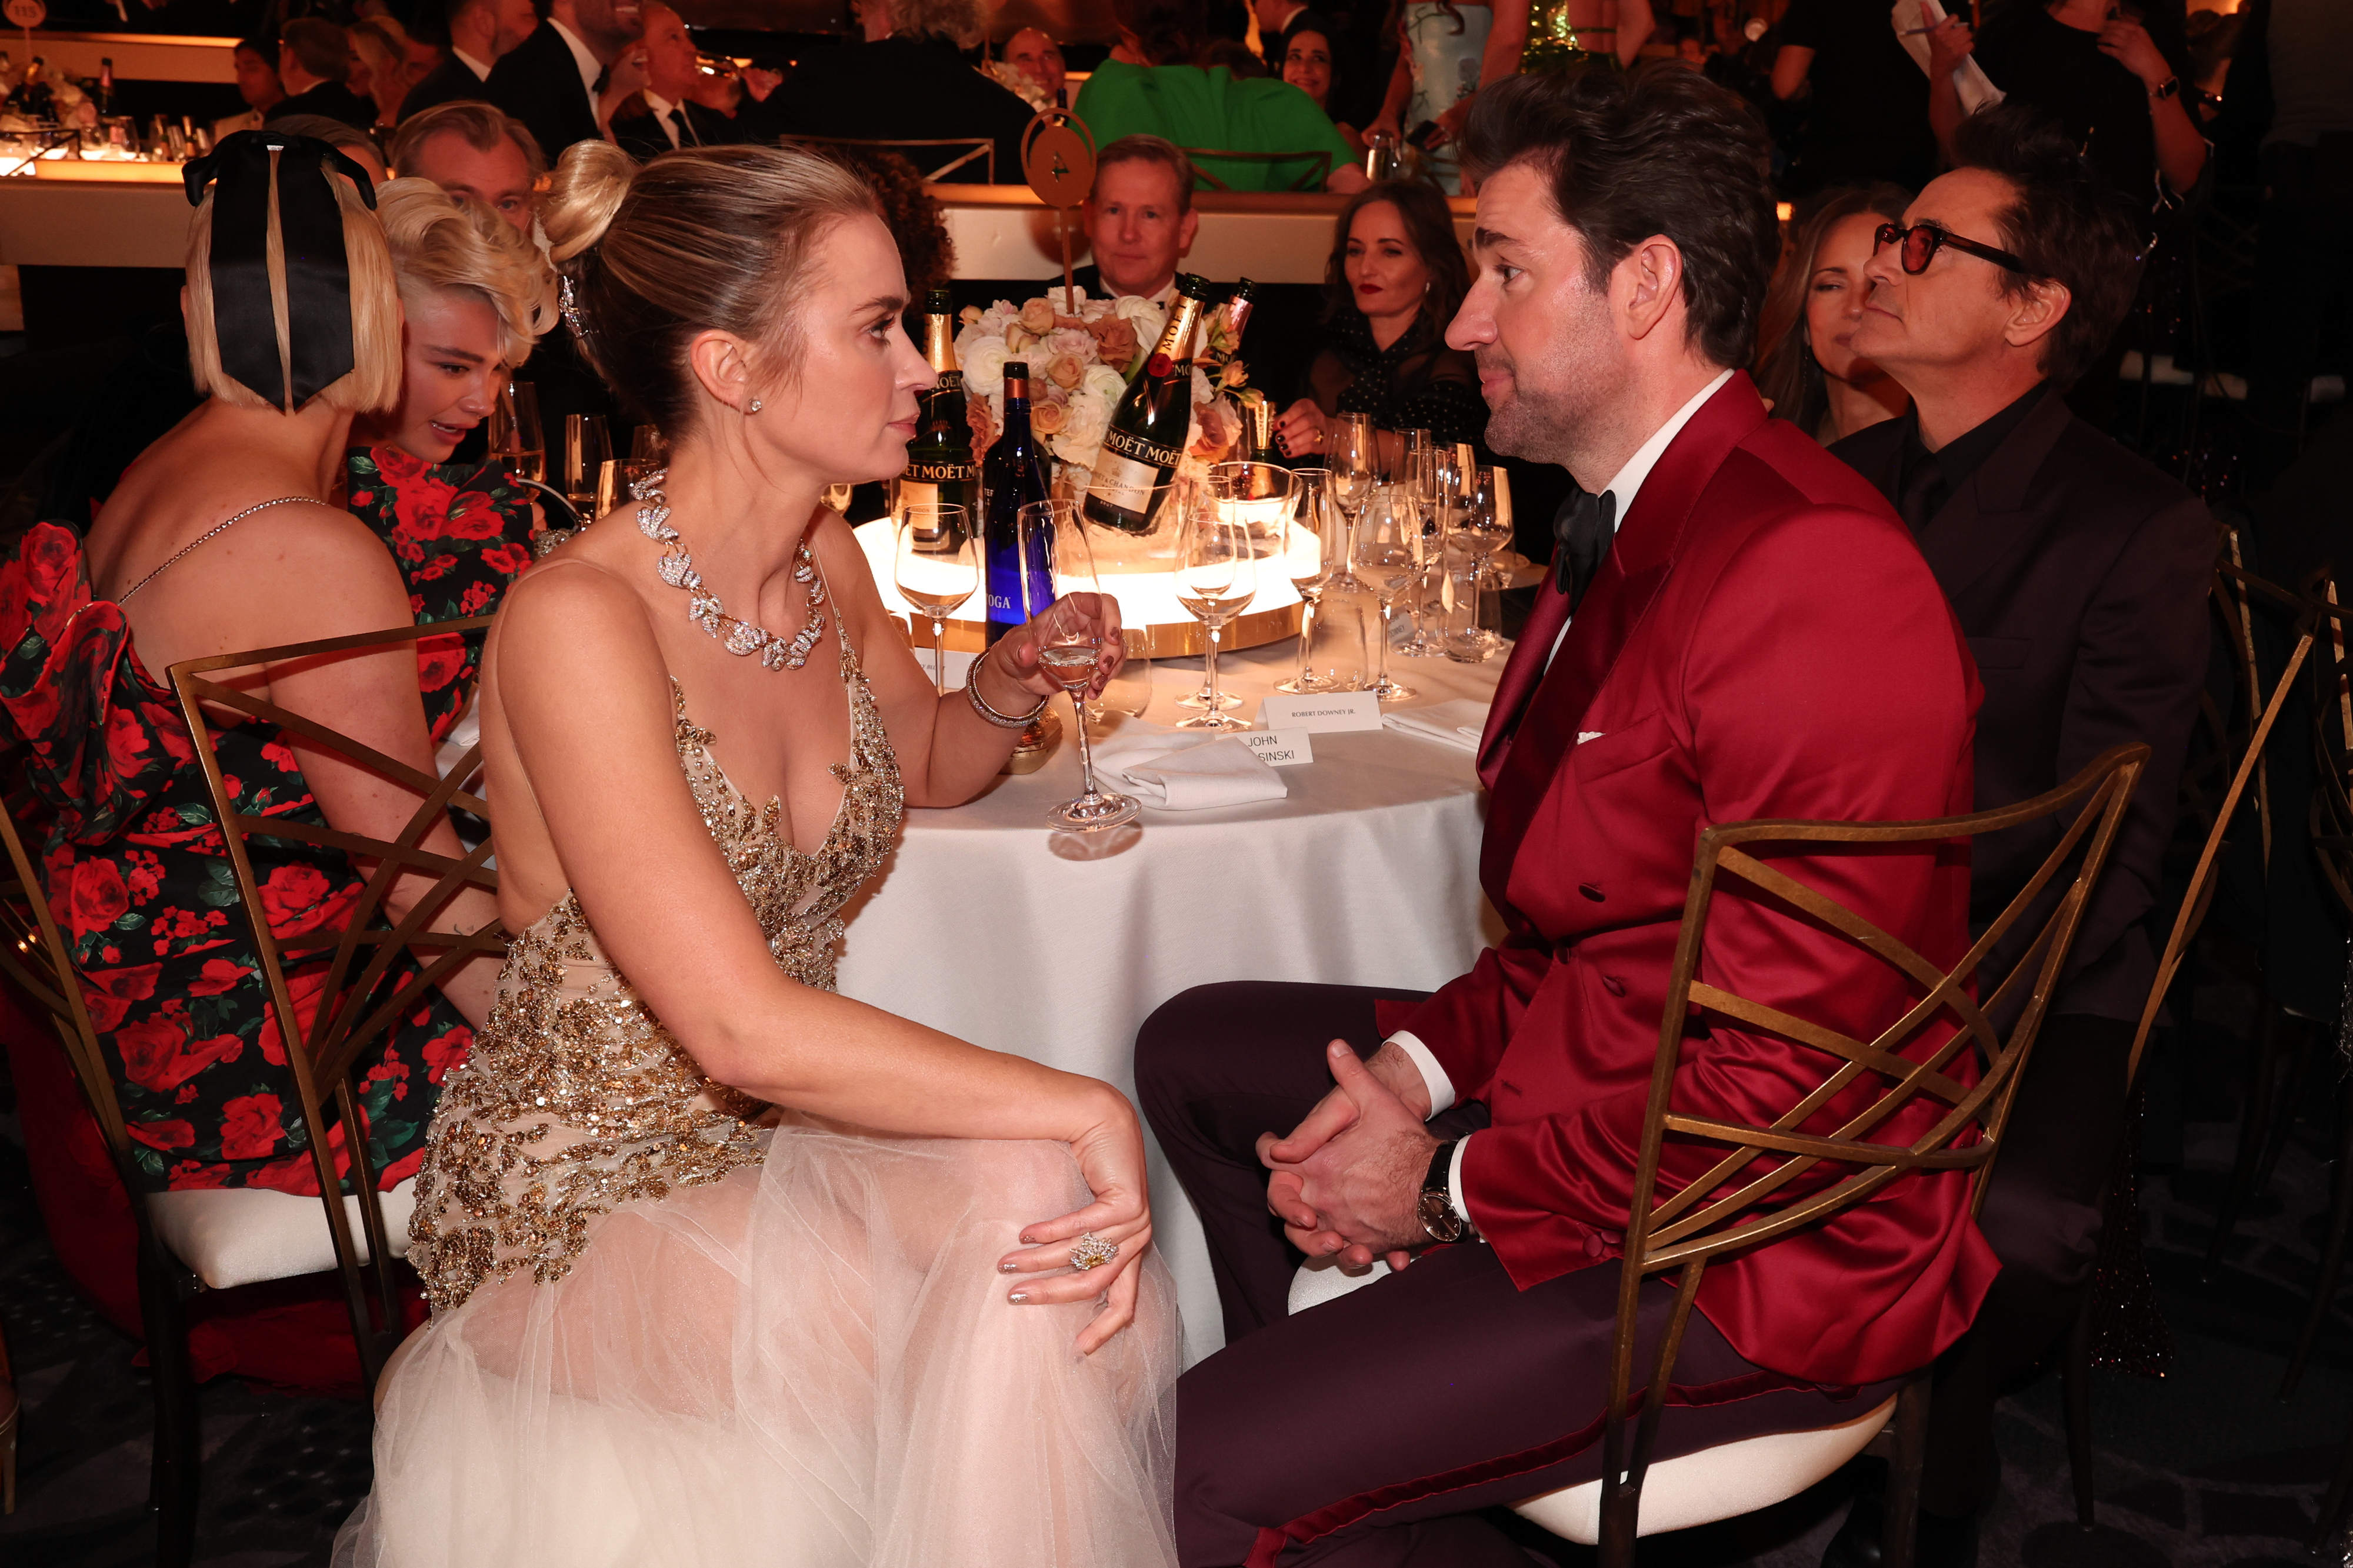 John and Emily looking at each other as they sit at a table during an awards show